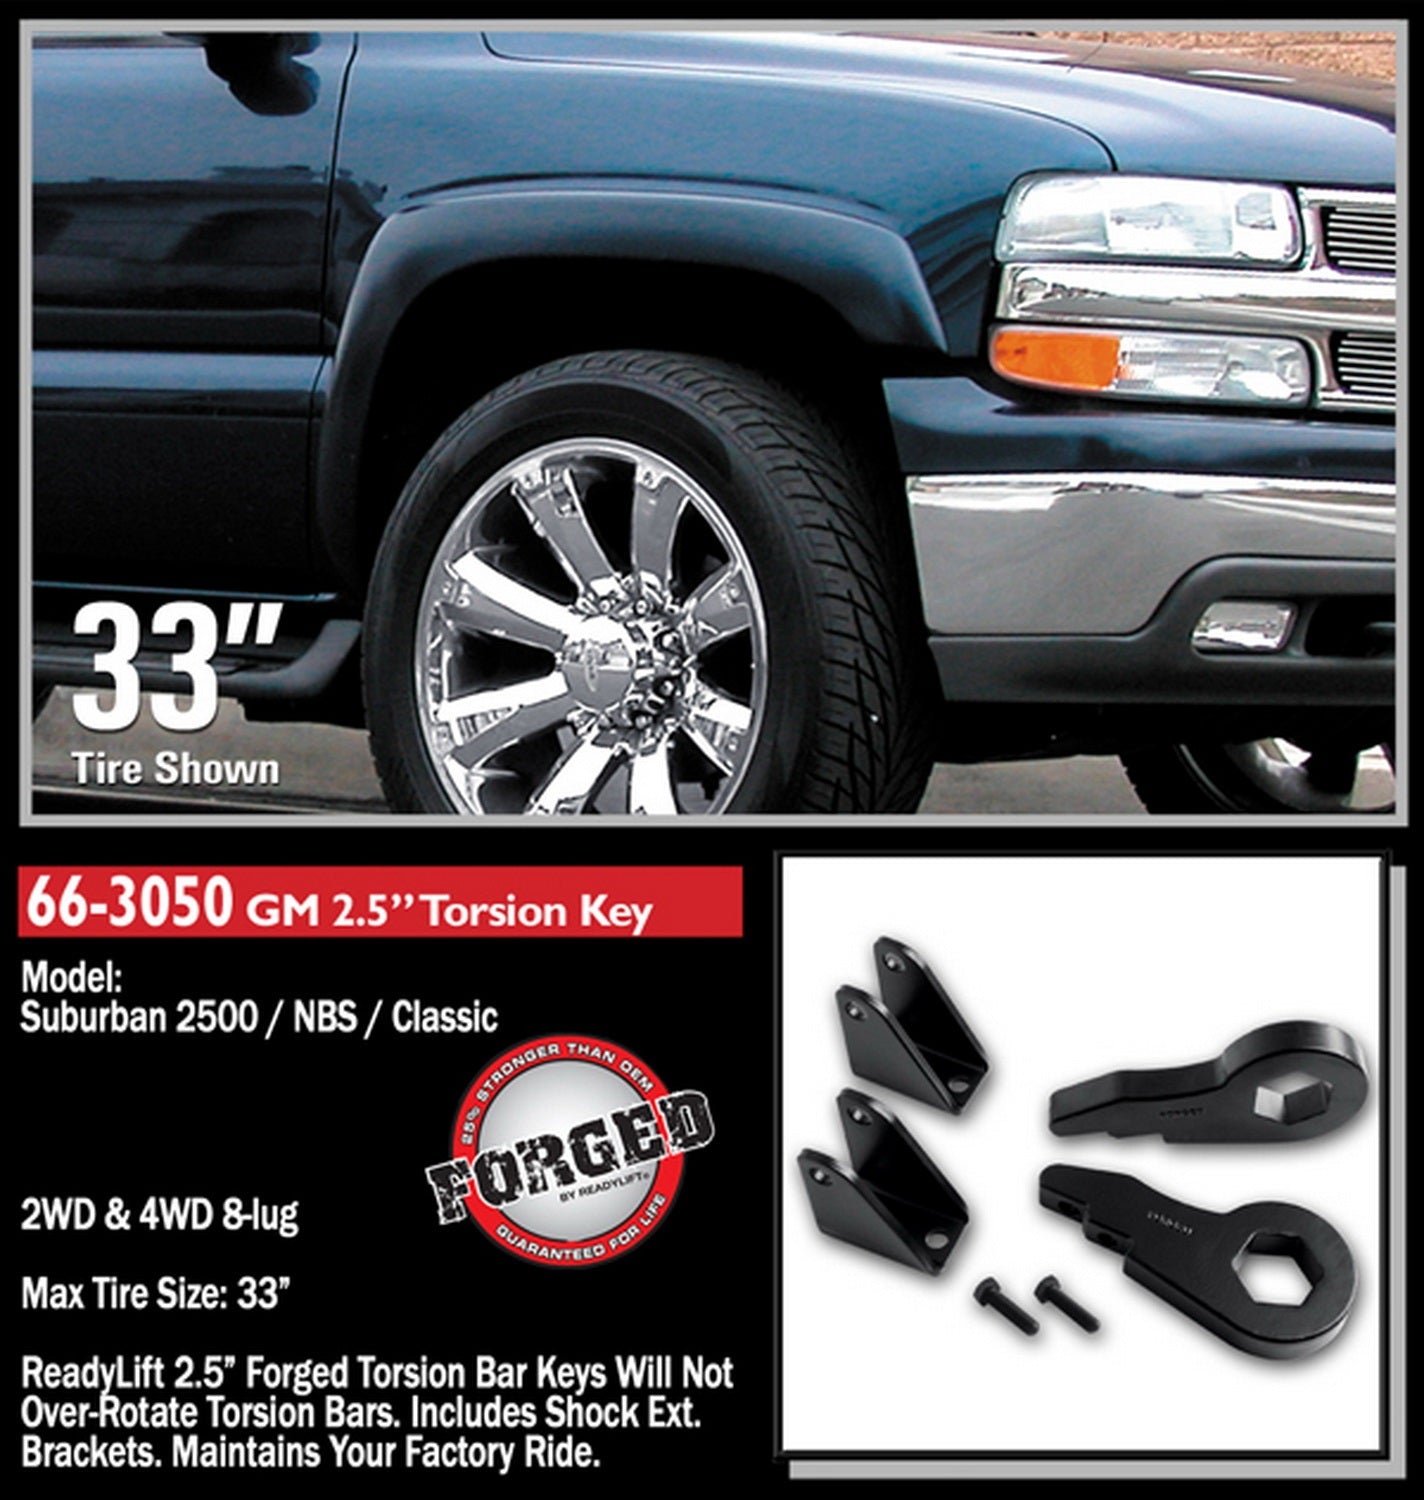 Readylift 66-3050 2.5" Front Leveling Kit W/ Forged Torsion Key - GM Full-Size Truck SUV 2000-2012, Black, For Tires Up to 33"